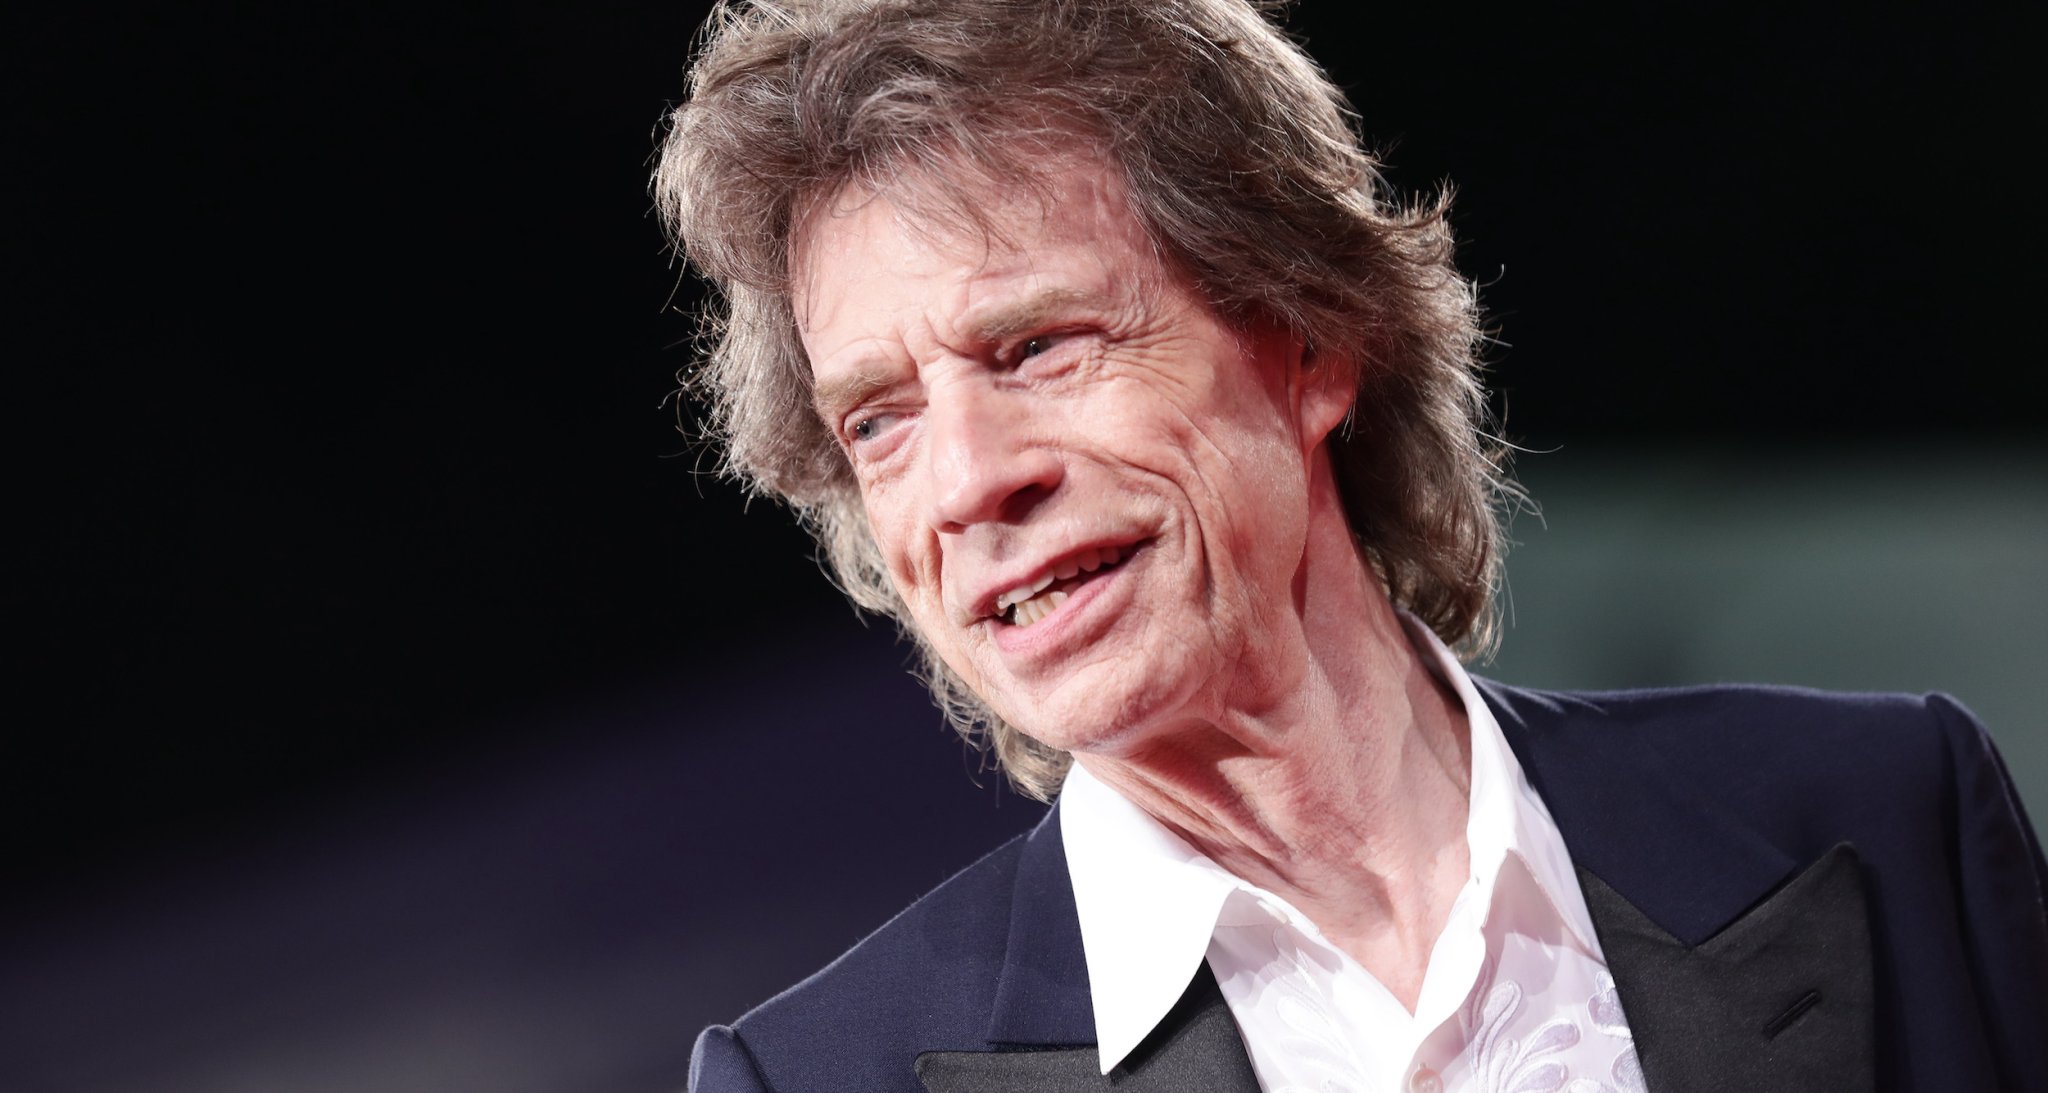 Mick Jagger Slams Harry Styles Comparisons: ‘He Doesn’t Have a Voice Like Mine’